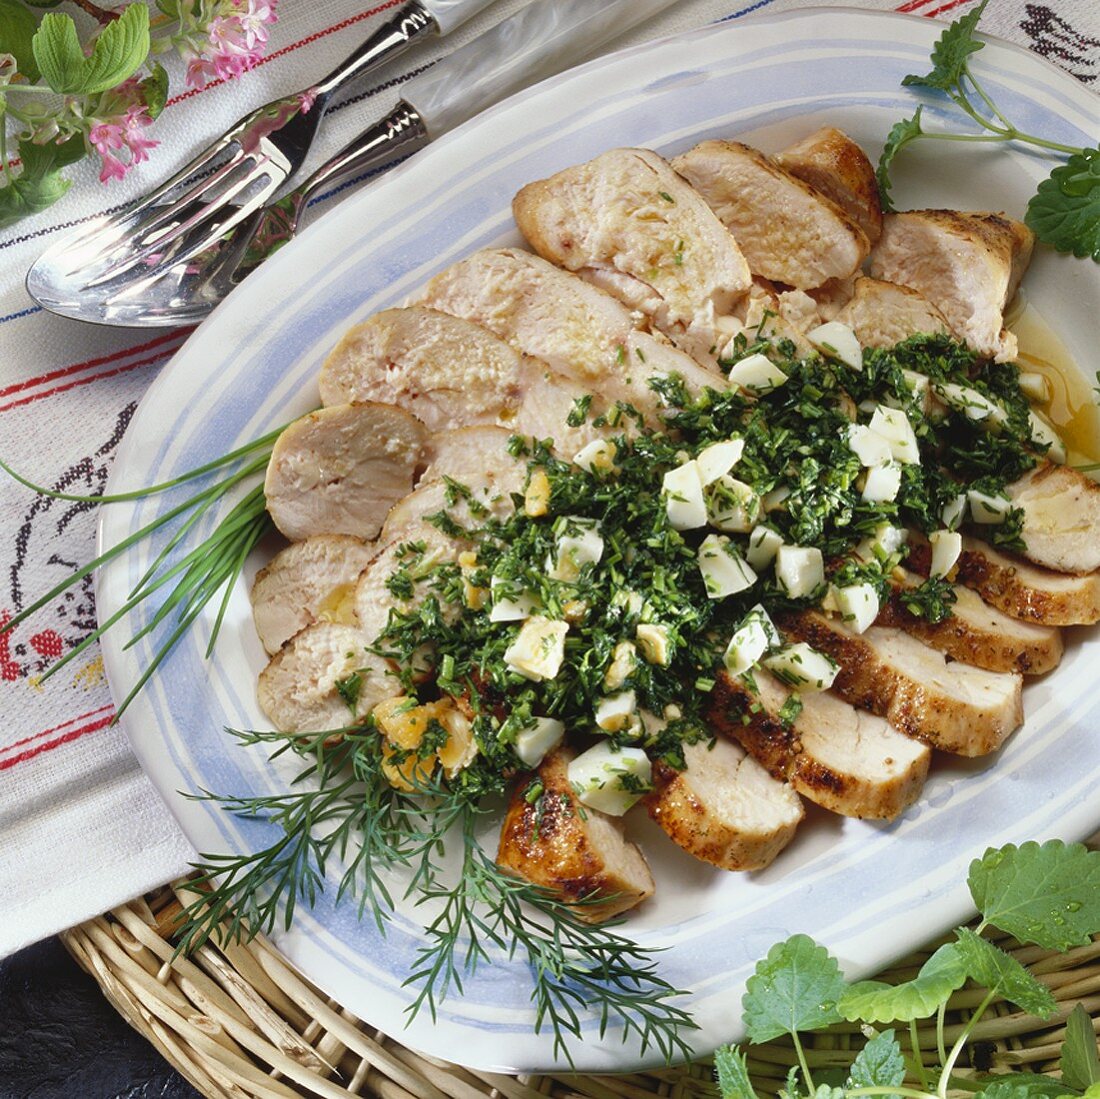 Chicken breast fillet with herbs